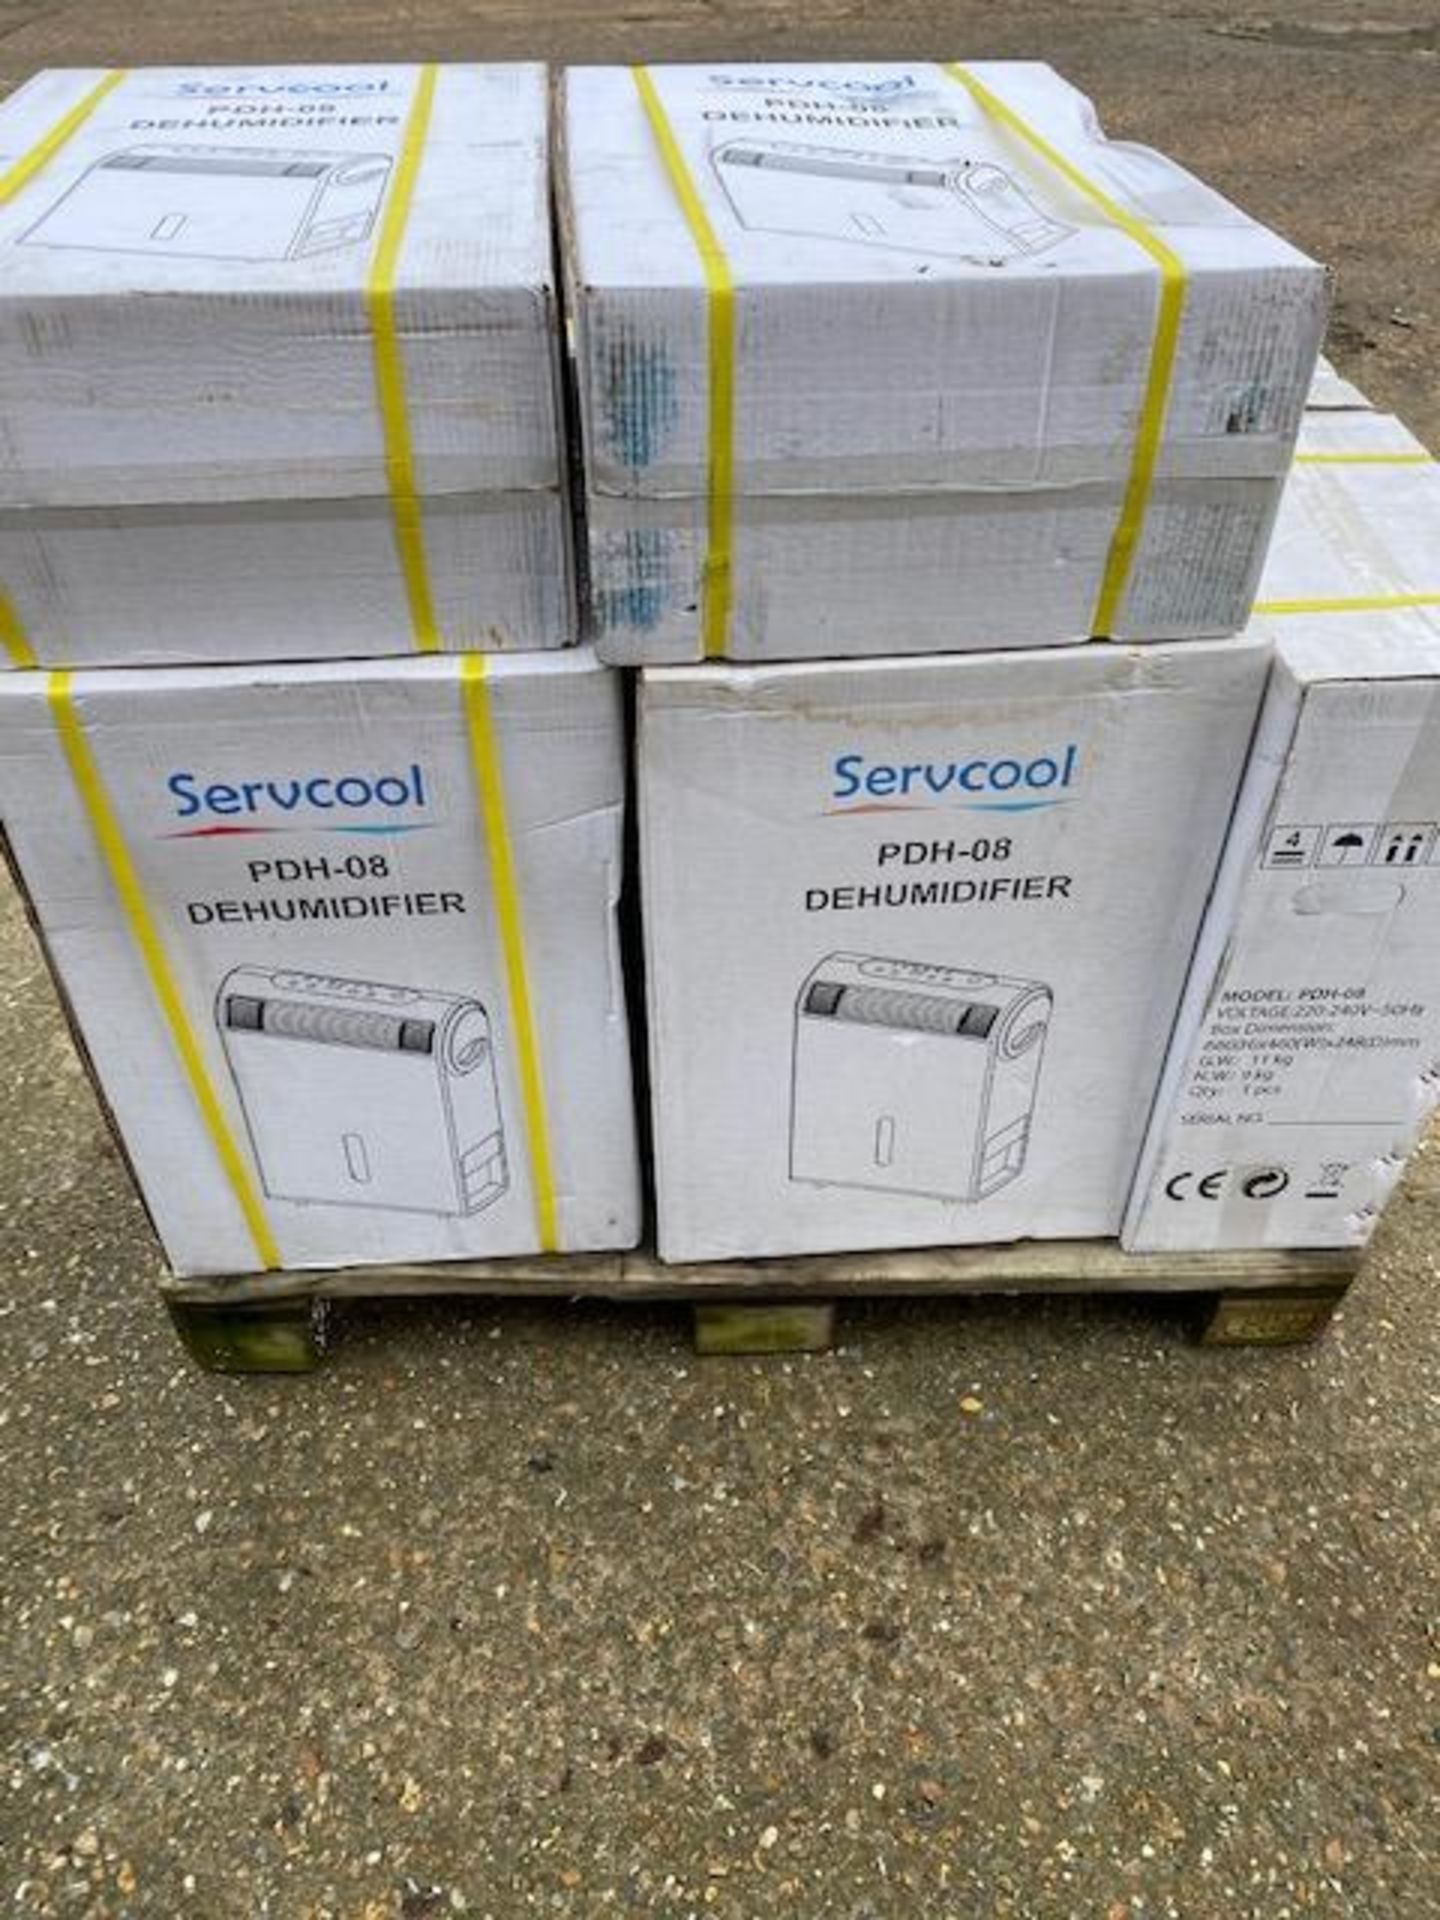 10x Servool PDH-08 Dehumidifiers, 220-240V, 50Hz - Image 8 of 12